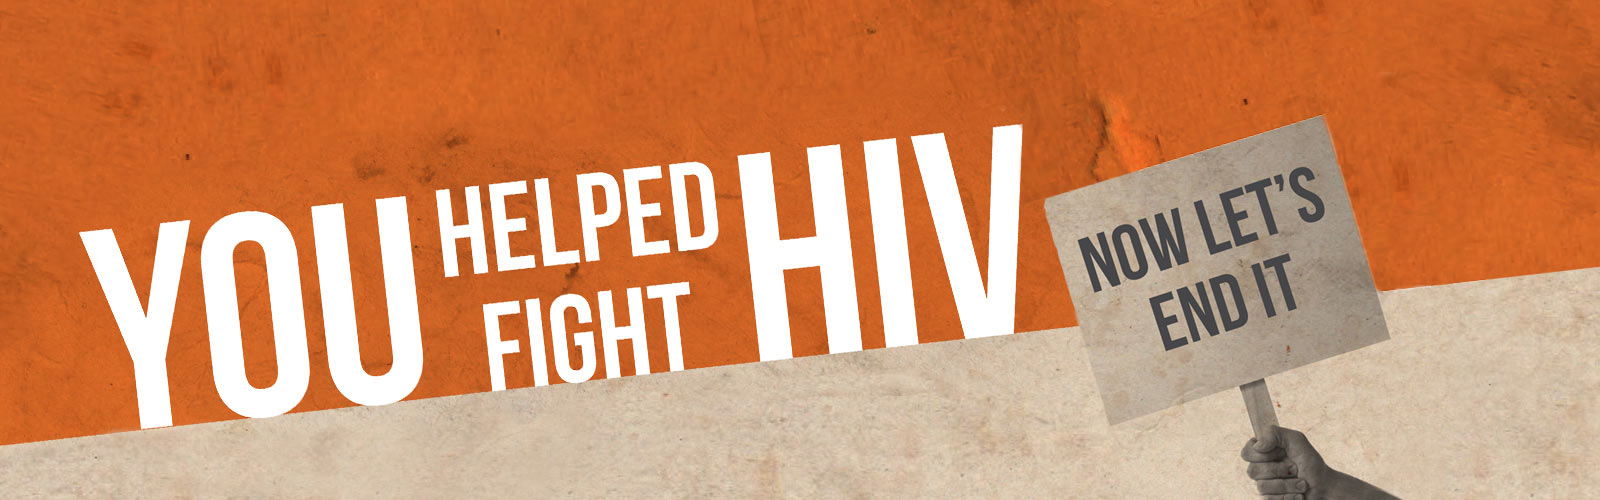 You helped fight HIV. Now let’s end it facebook cover picture